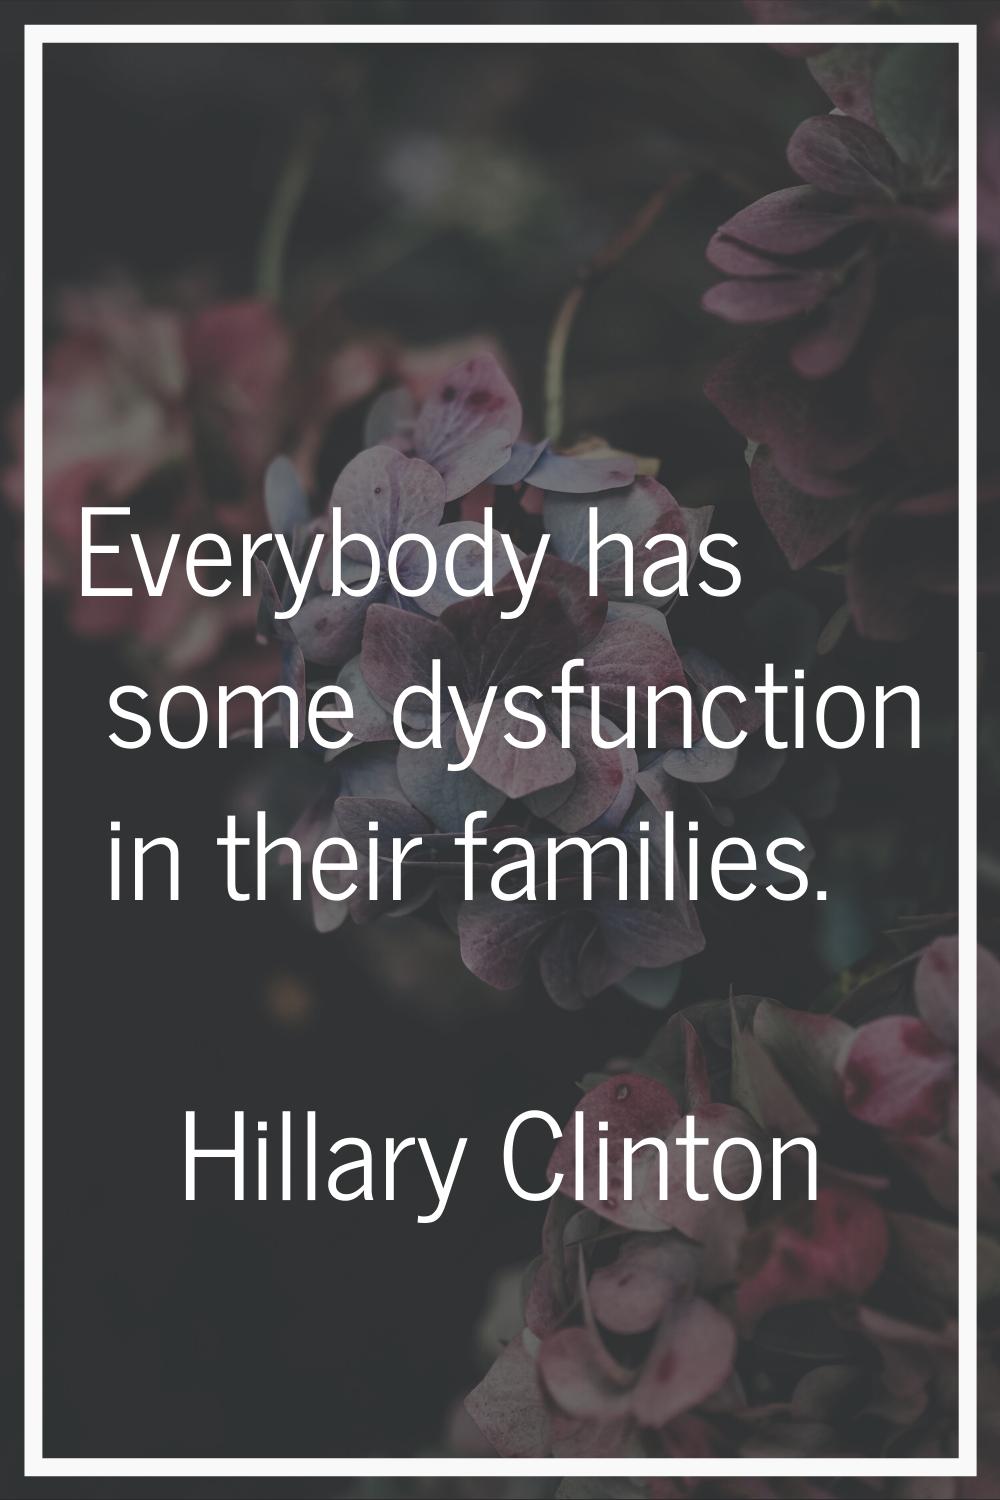 Everybody has some dysfunction in their families.